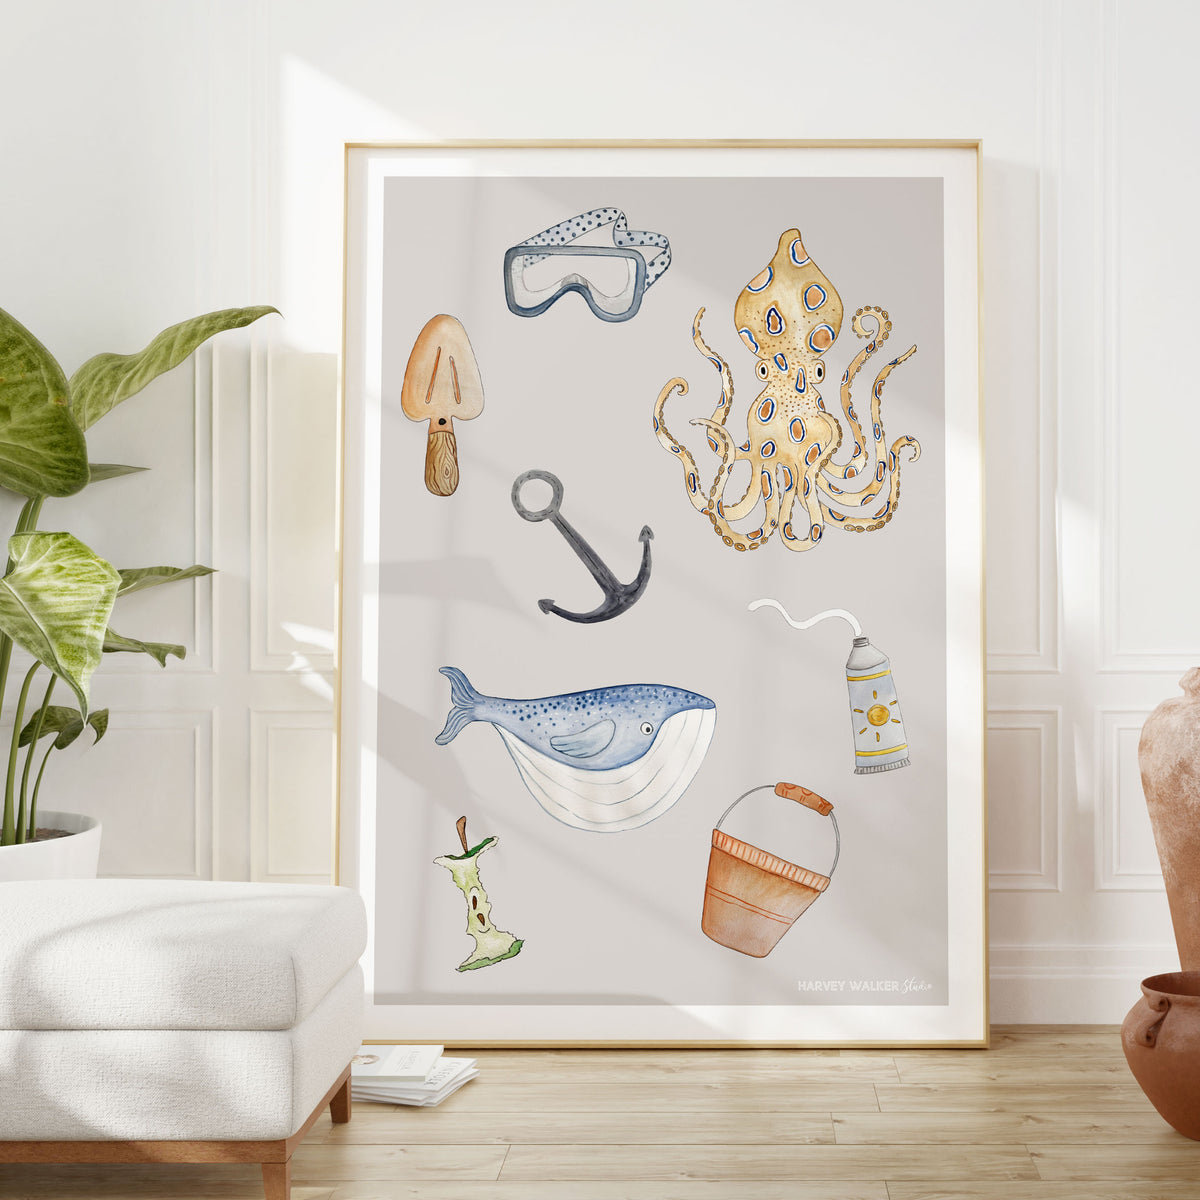 Large format beach artwork. hand illustrated on the northern beaches. Inspired by beach discovery and illustrated with watercolour paints. 